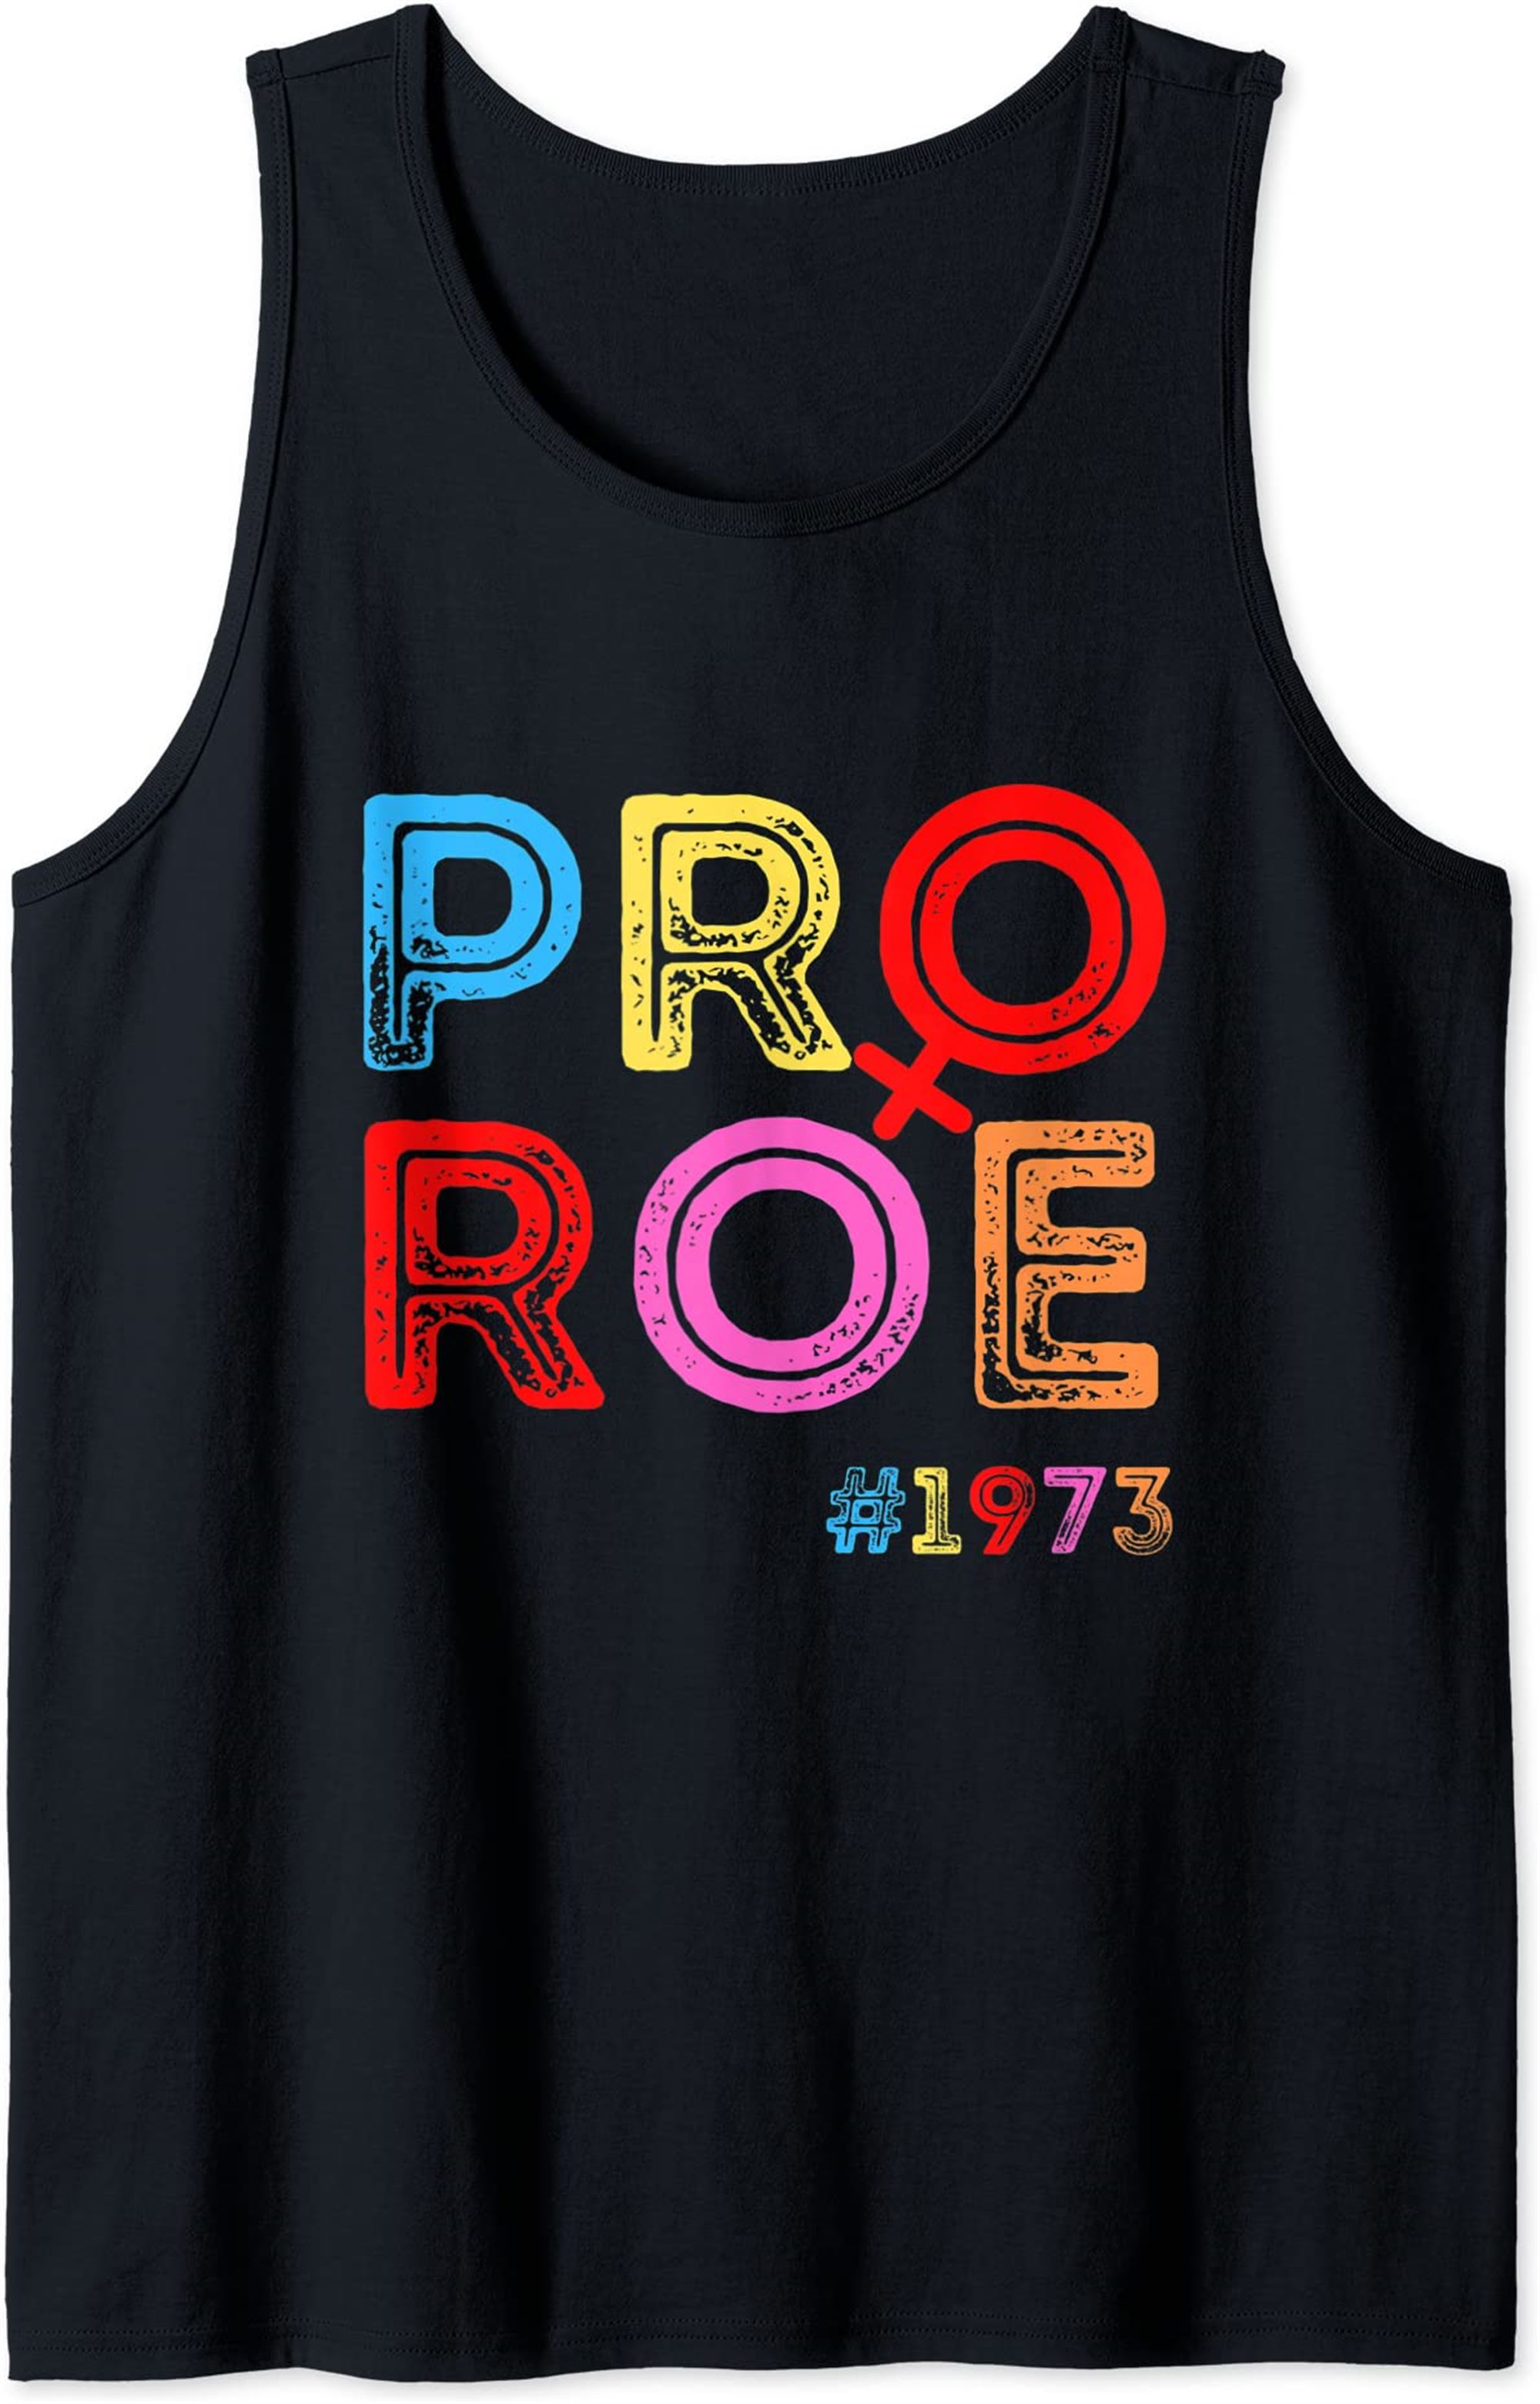 Pro Choice Pro Roe Vintage 1973 Mind Your Own Uterus Tank Top Size Up To 5xl